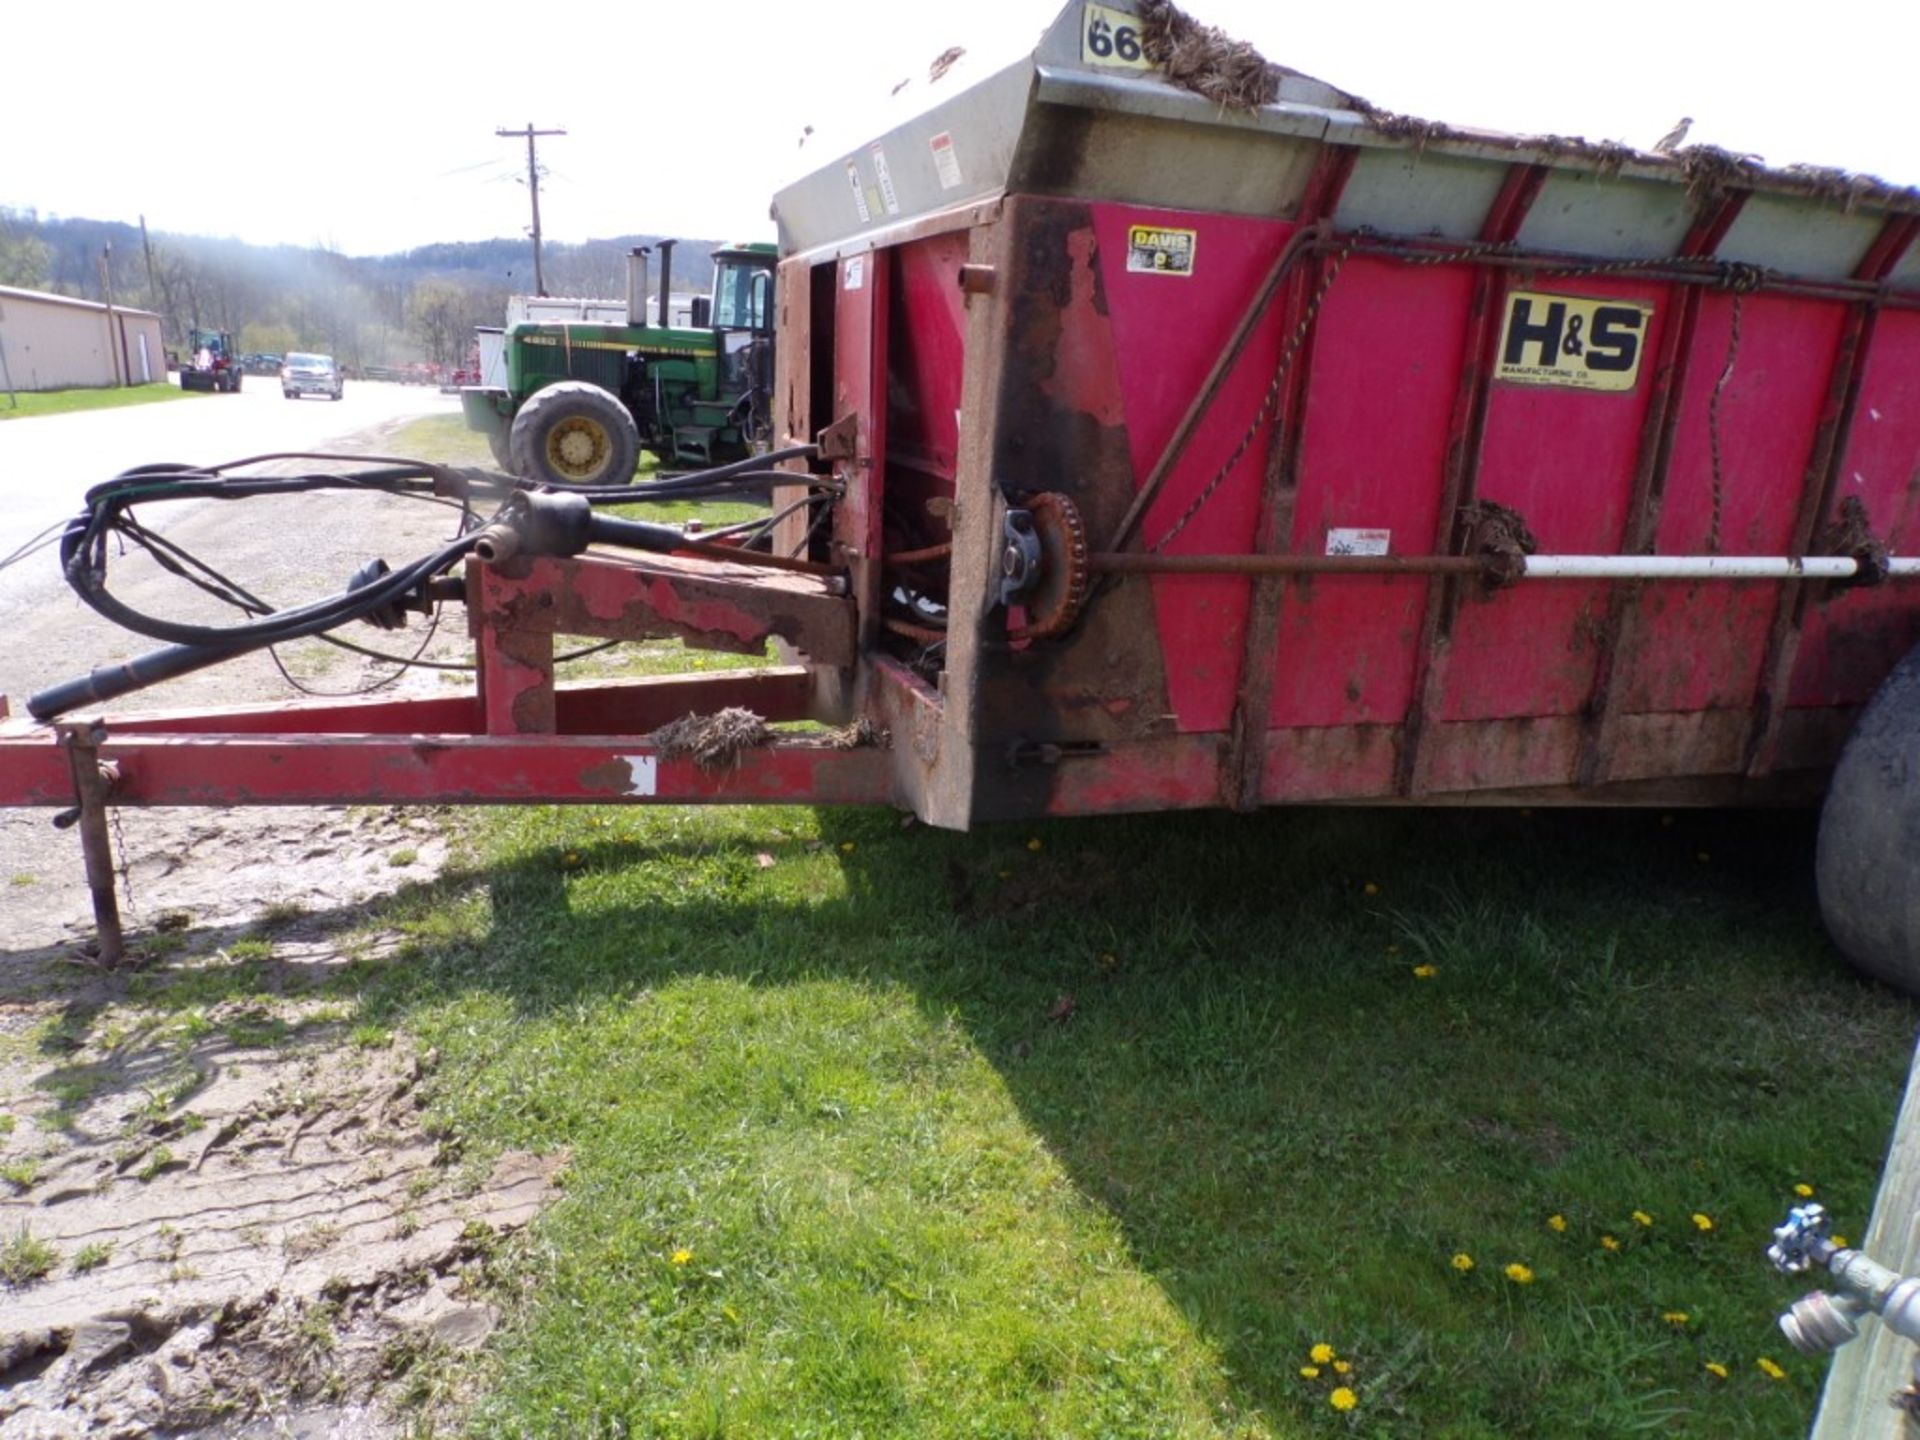 H & S 660 Big Box Spreader w/End Gate, Tandem Axle (4339) - Image 3 of 5